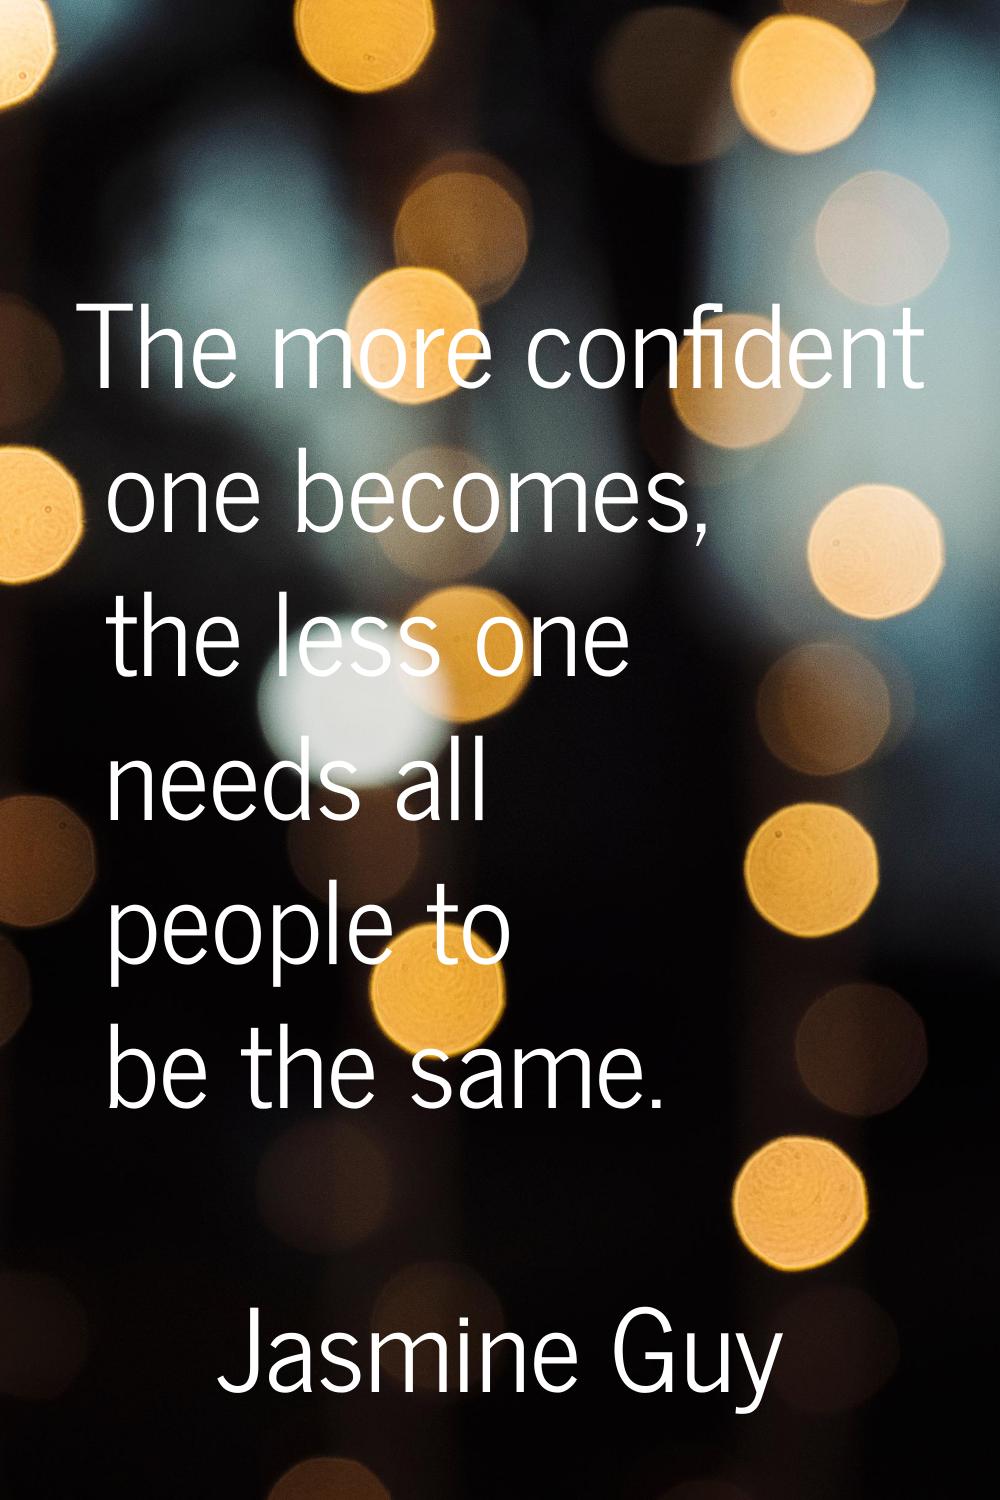 The more confident one becomes, the less one needs all people to be the same.